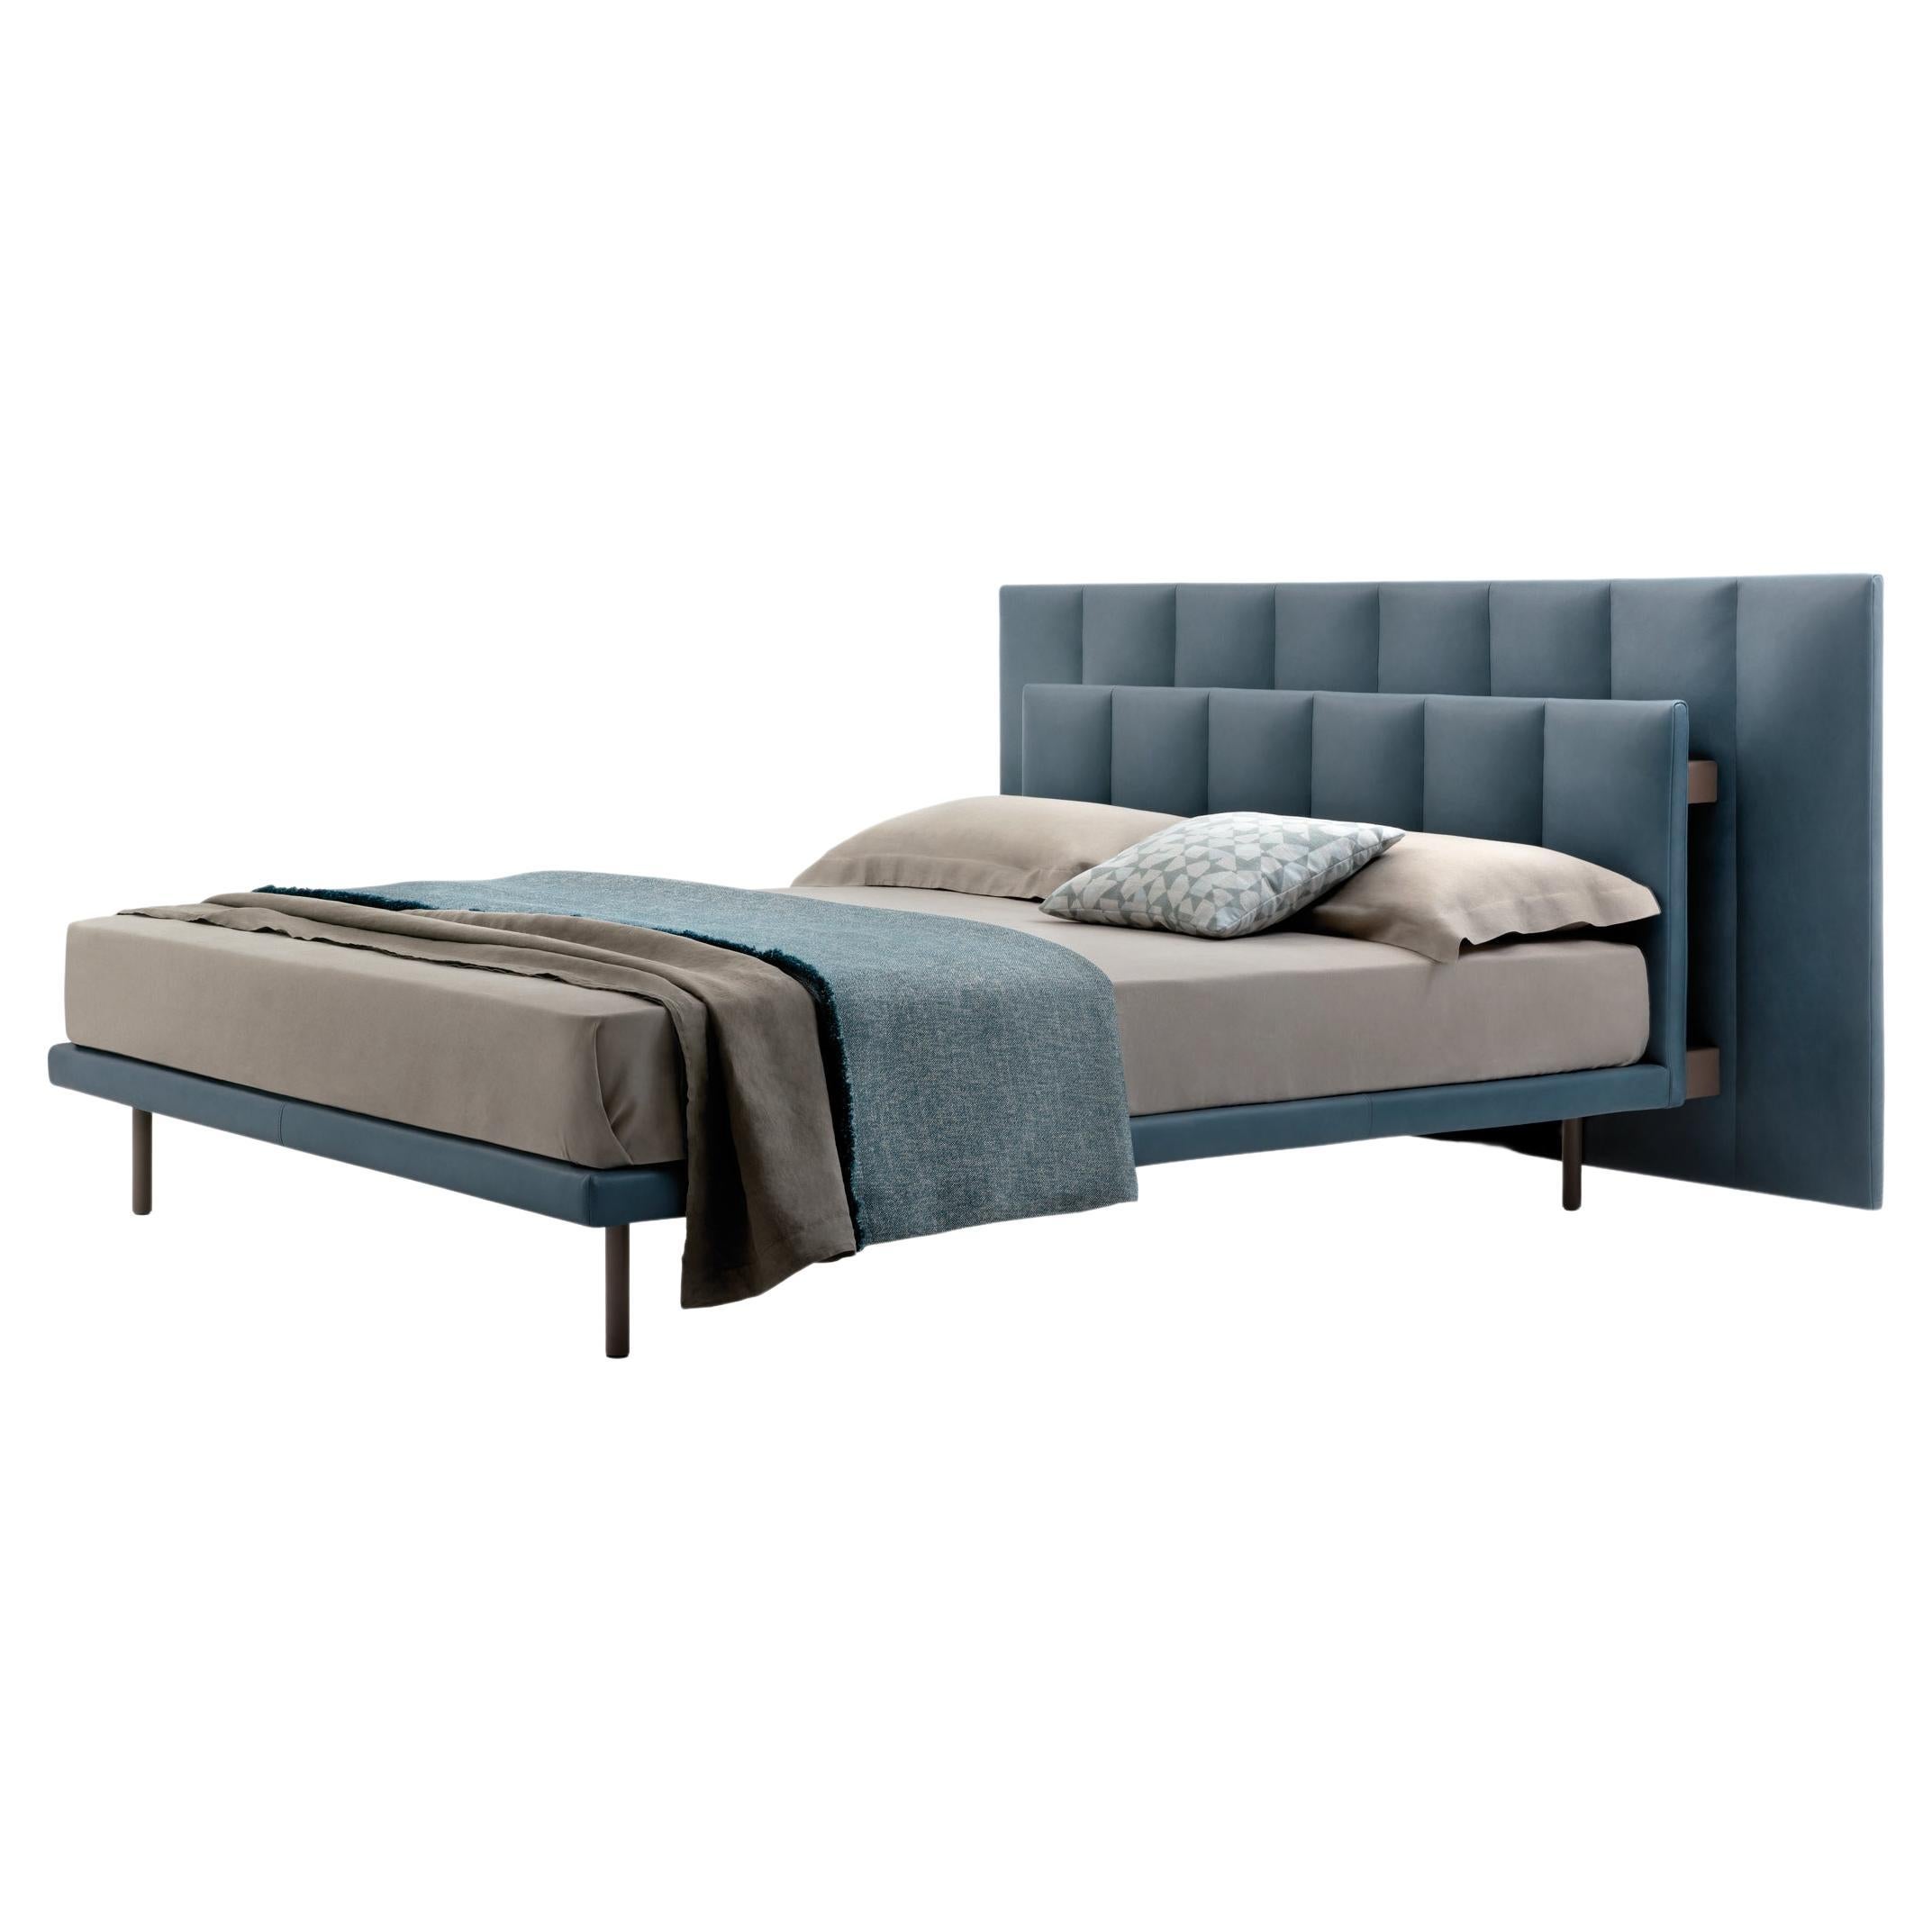 Zanotta Medium Grangala Bed with Separate Springing in Grey Upholstery For Sale